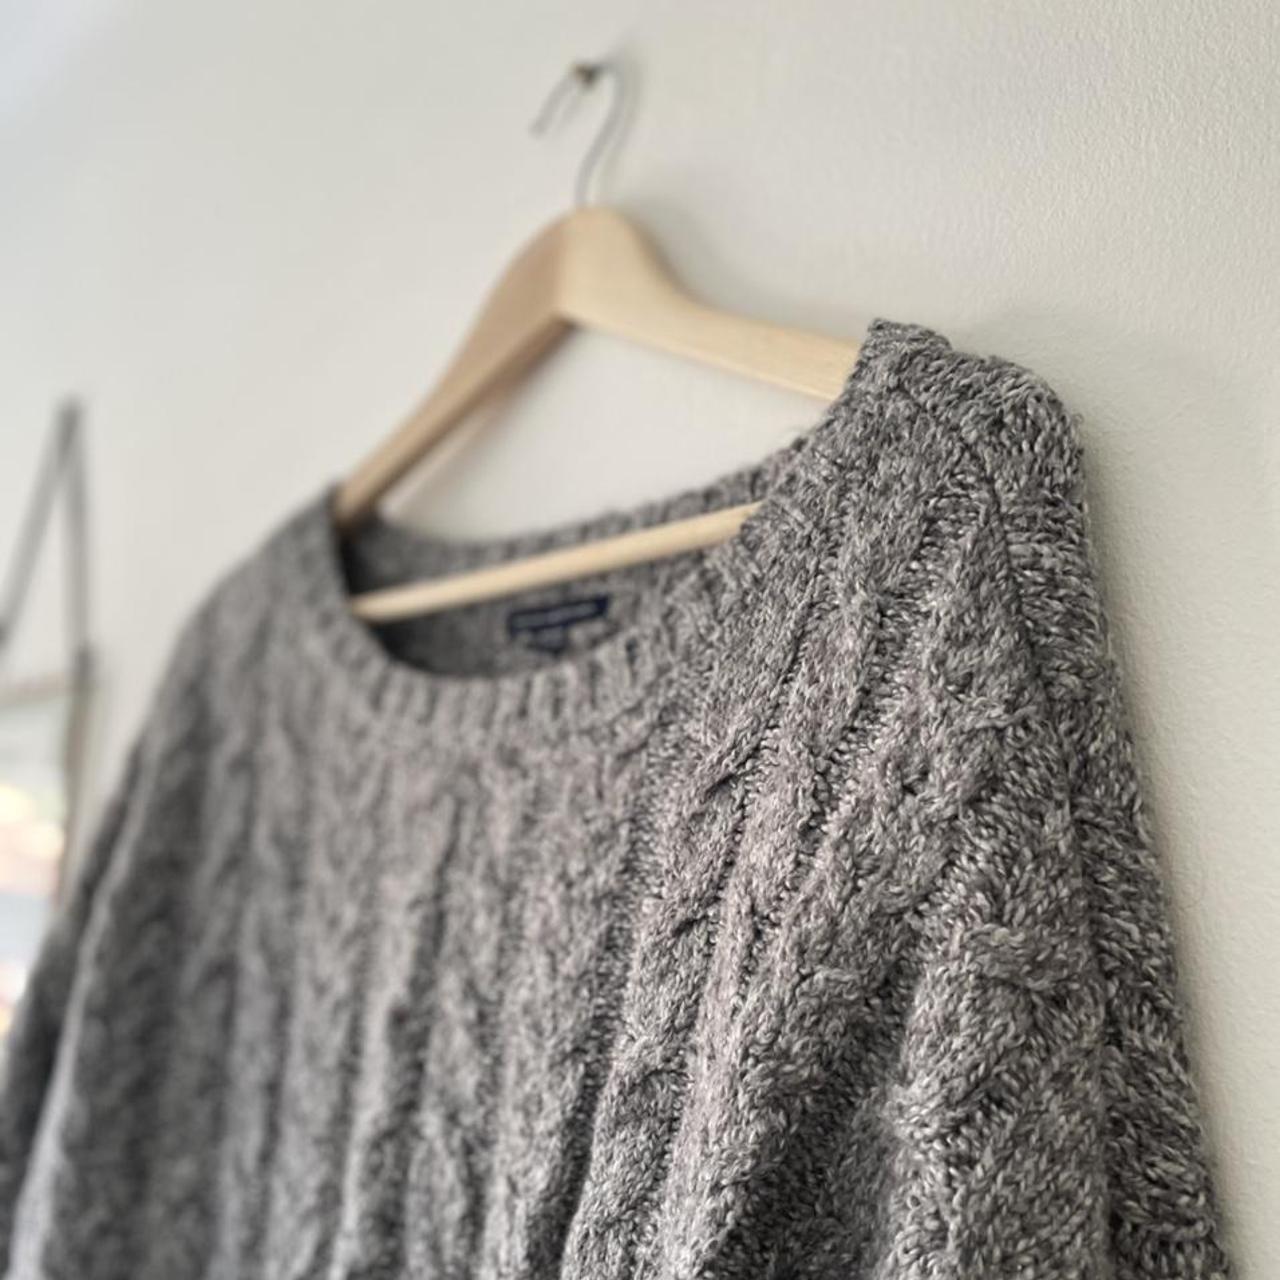 American Eagle soft cable knit jumper in grey This... - Depop